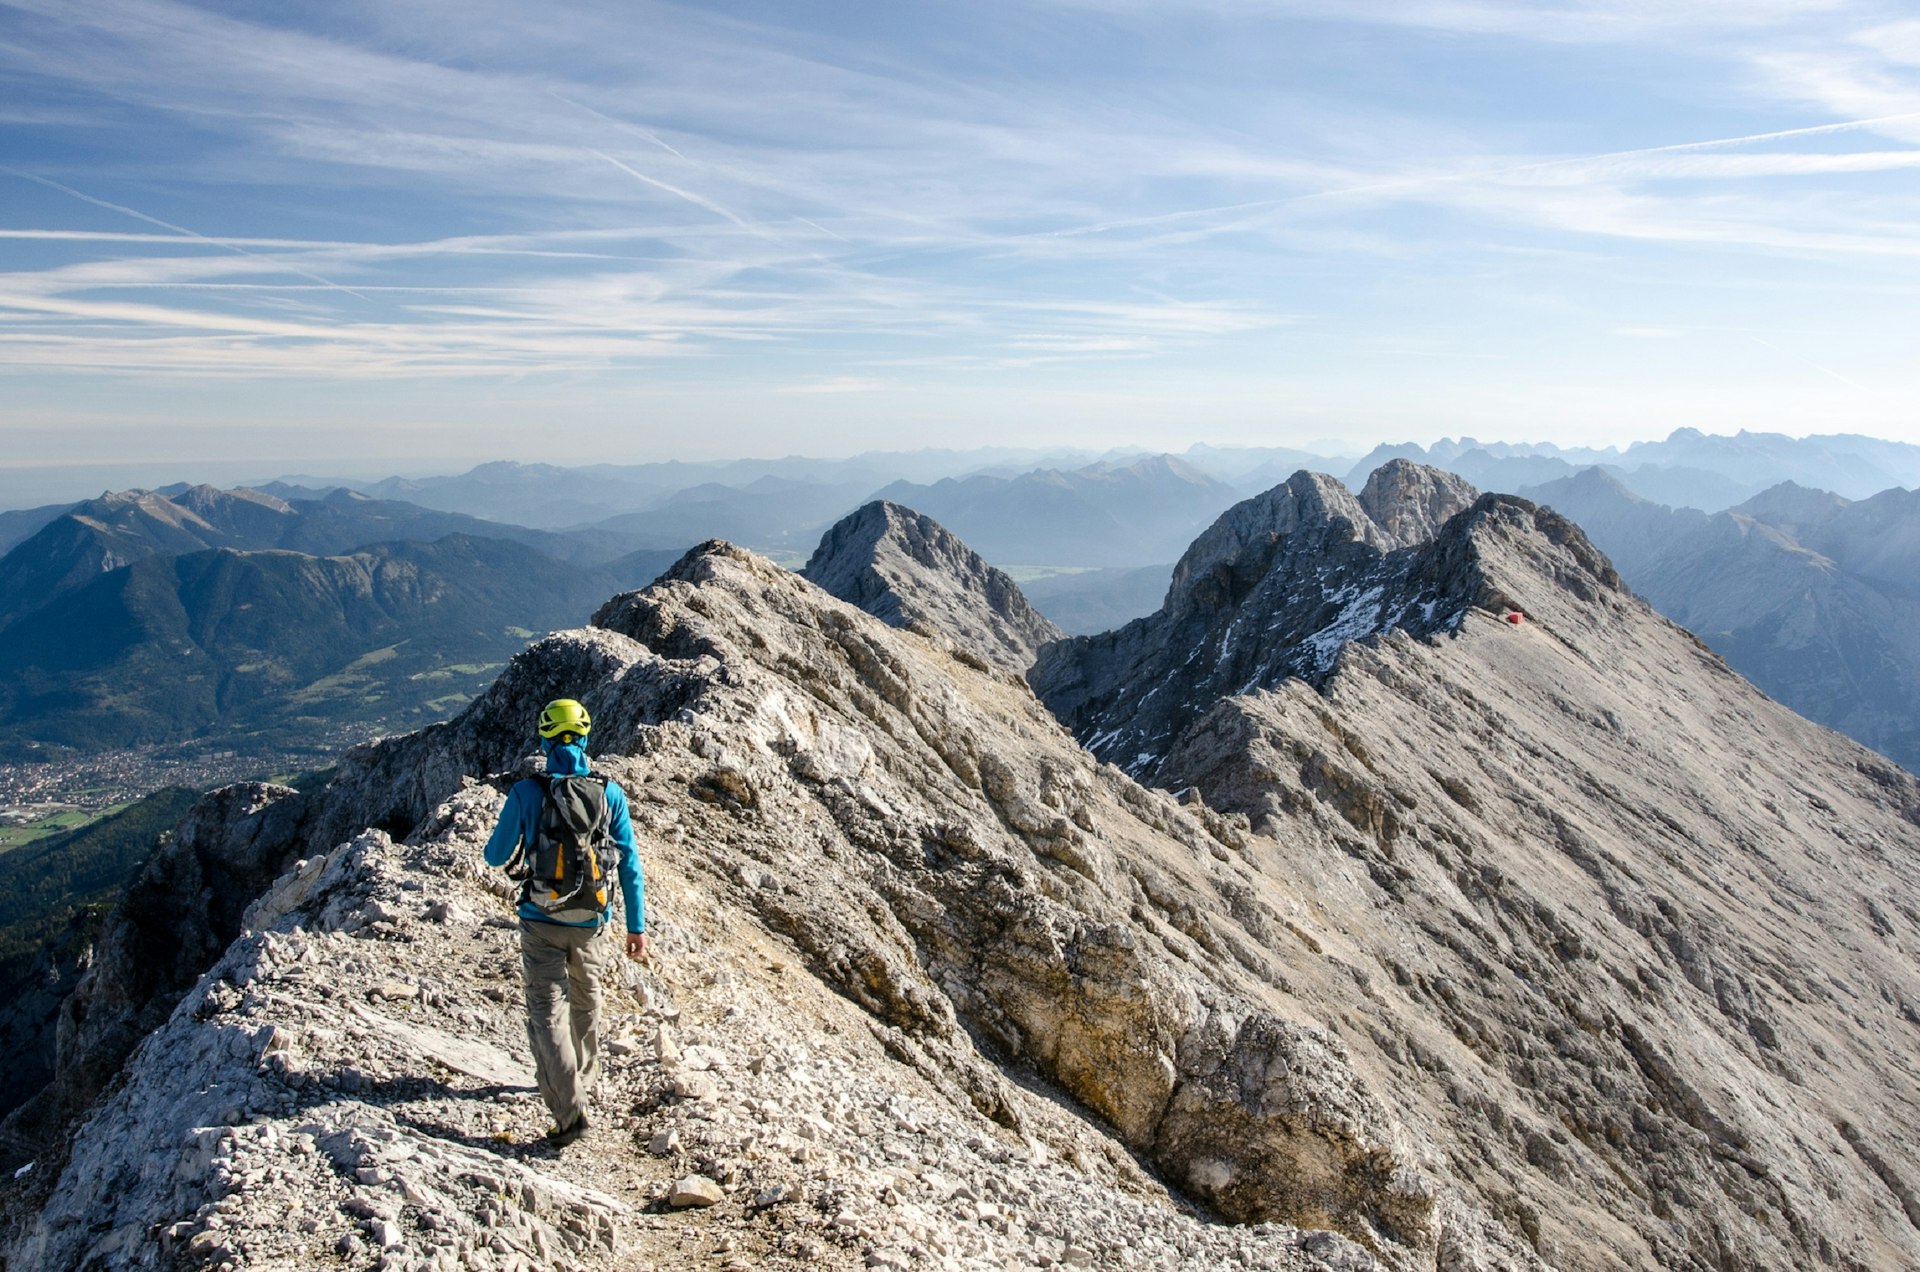 A man in a backpack and helmet walks along a rocky summit ridge high above distant alpine valleys.